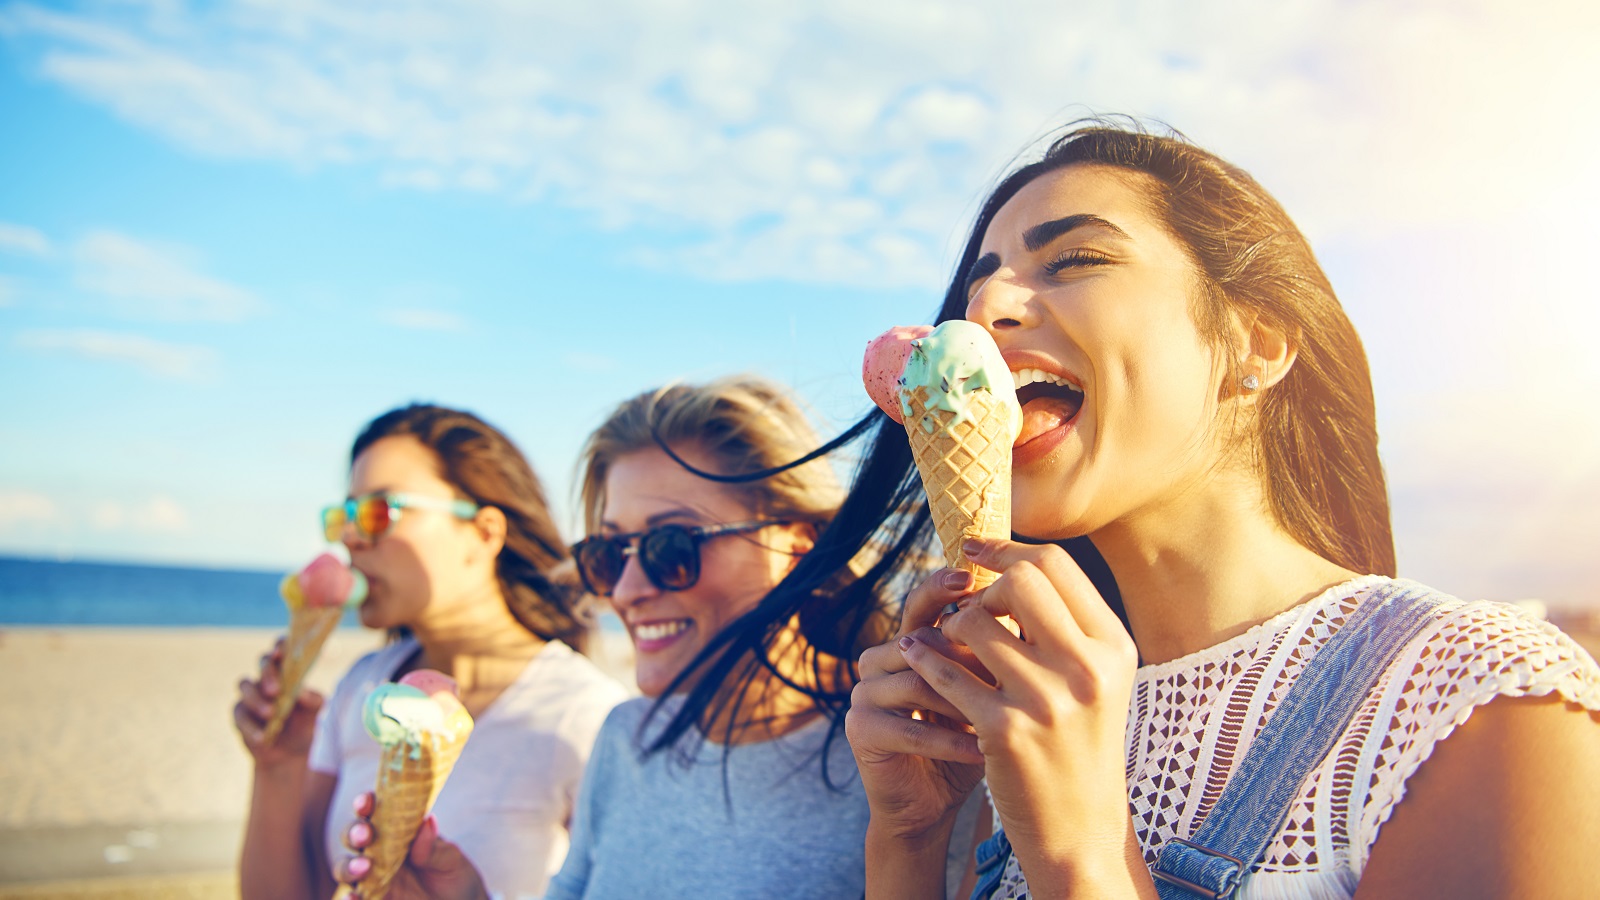 Three young woman eating ice cream cones